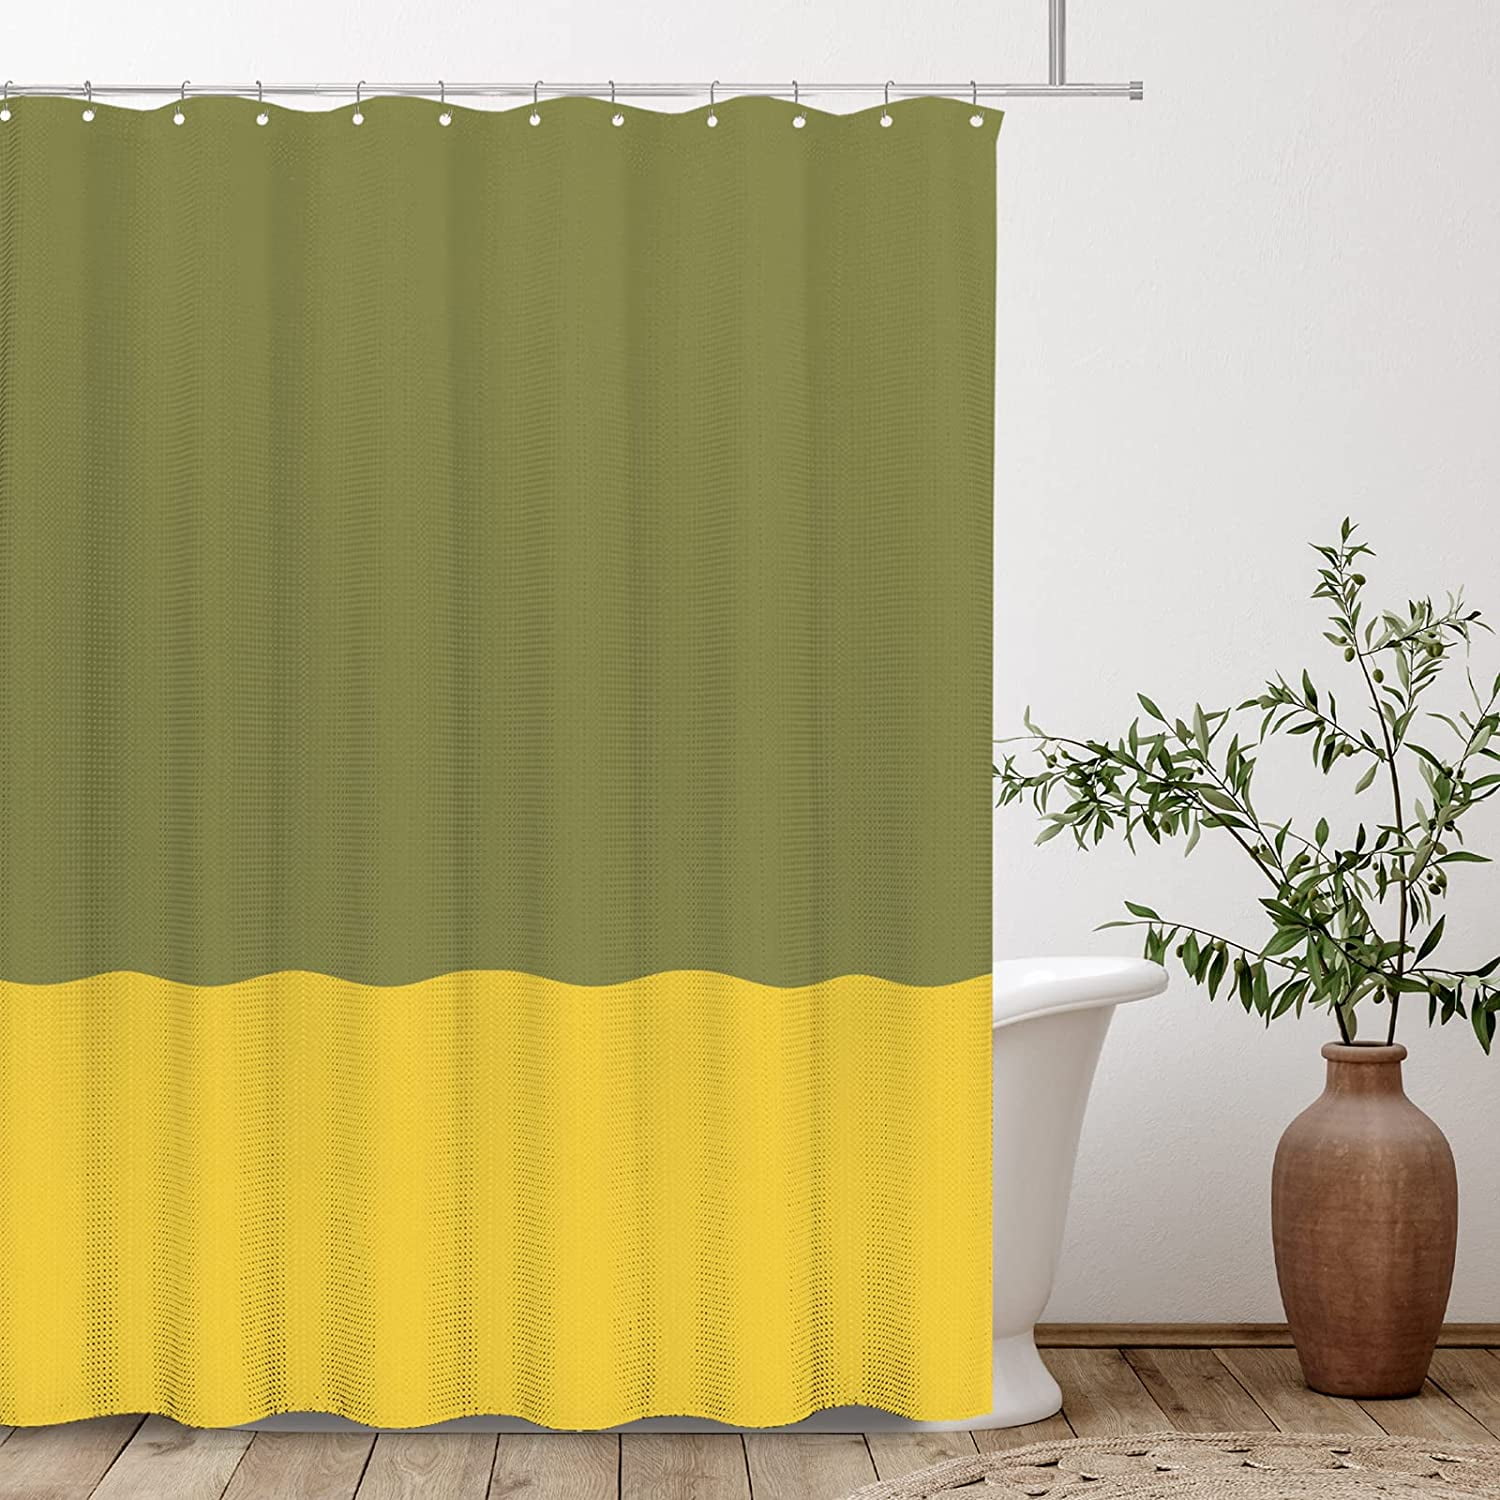 JOOCAR Olive Green Lemon Yellow 2 Color Splicing Shower Curtain, Texture  Fabric Bathroom Decorative Waterproof Curtian 72x72 Inch with 12 Hooks 